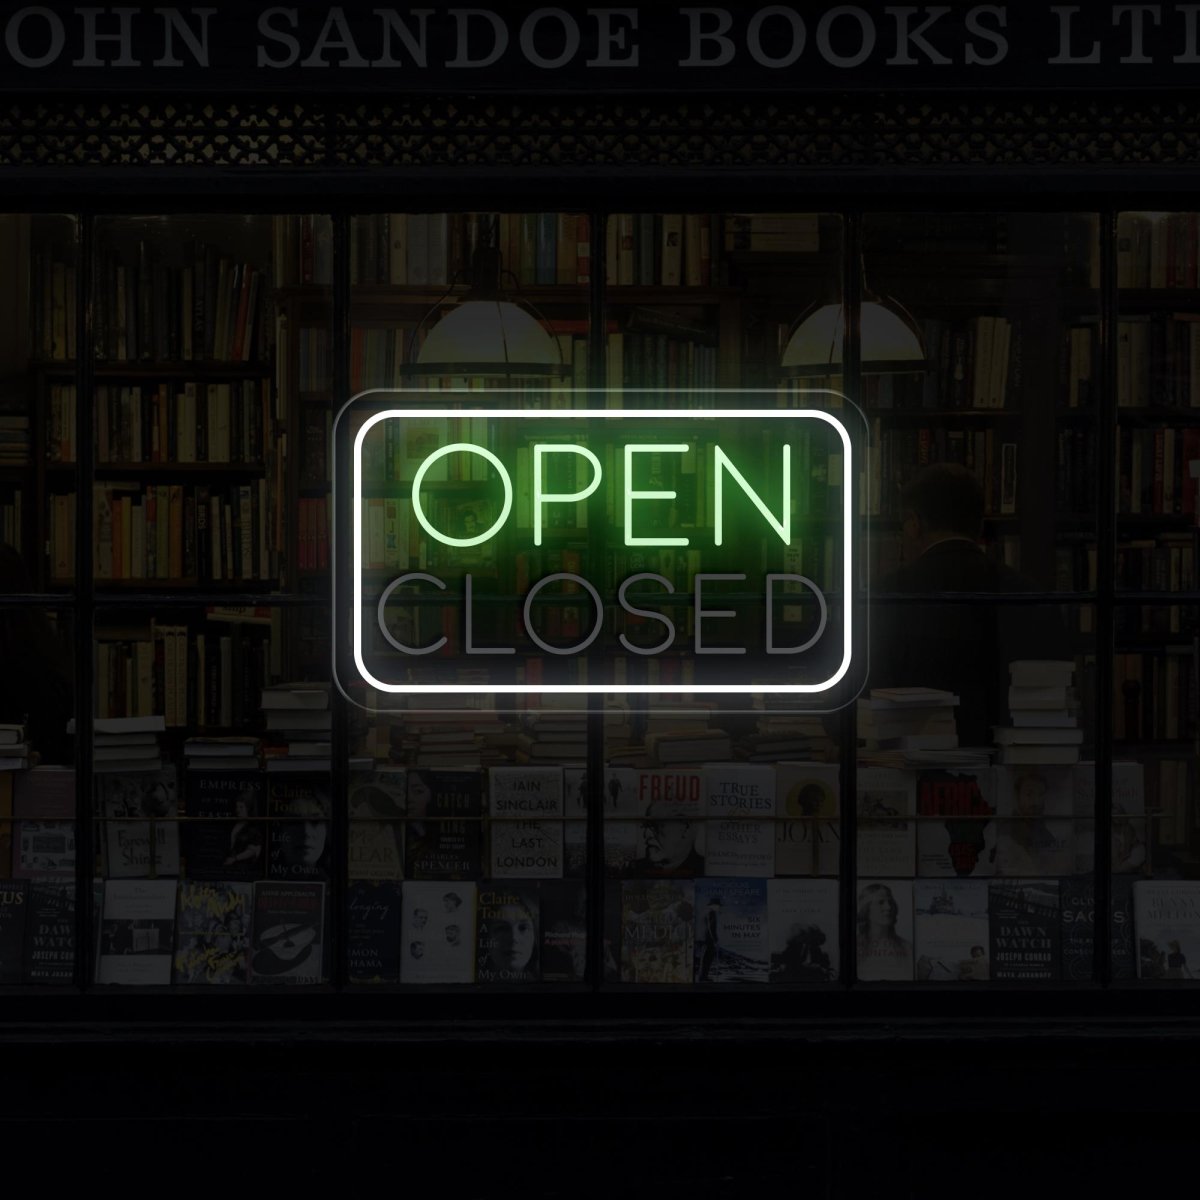 Dual LED Open/Closed Neon Sign - NEONXPERT